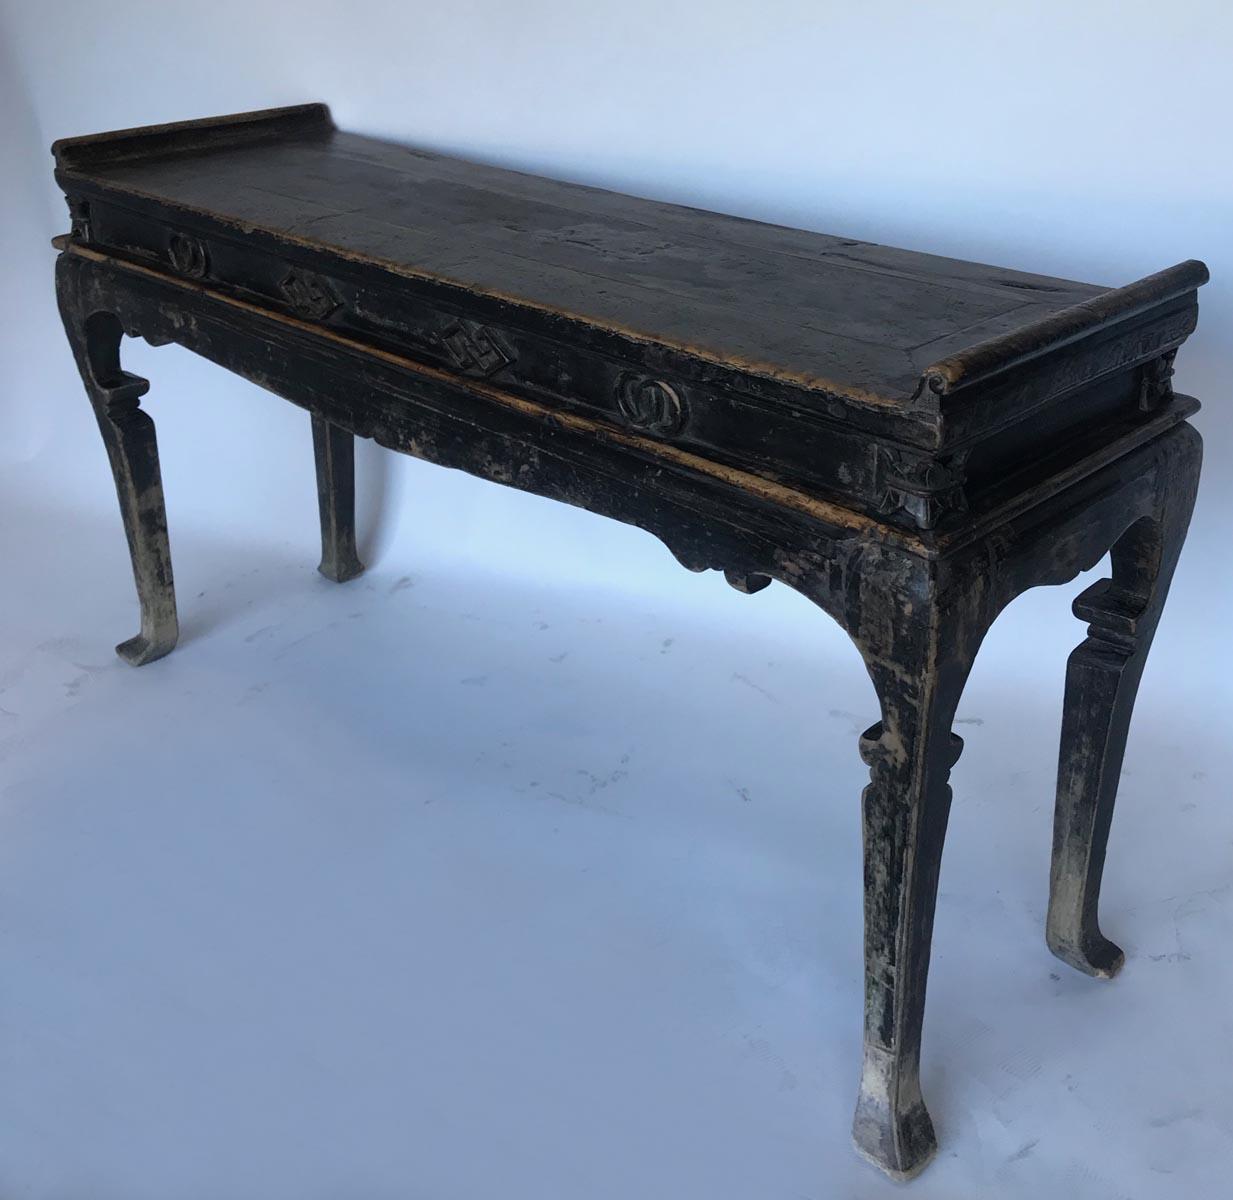 Dark elm, graceful Qing altar table from 19th century China. Geometric and stylized floral applied details on apron. Carved, elegant cabriole legs. Dark patina is all original and age appropriate wear. Sturdy and functional as a console.